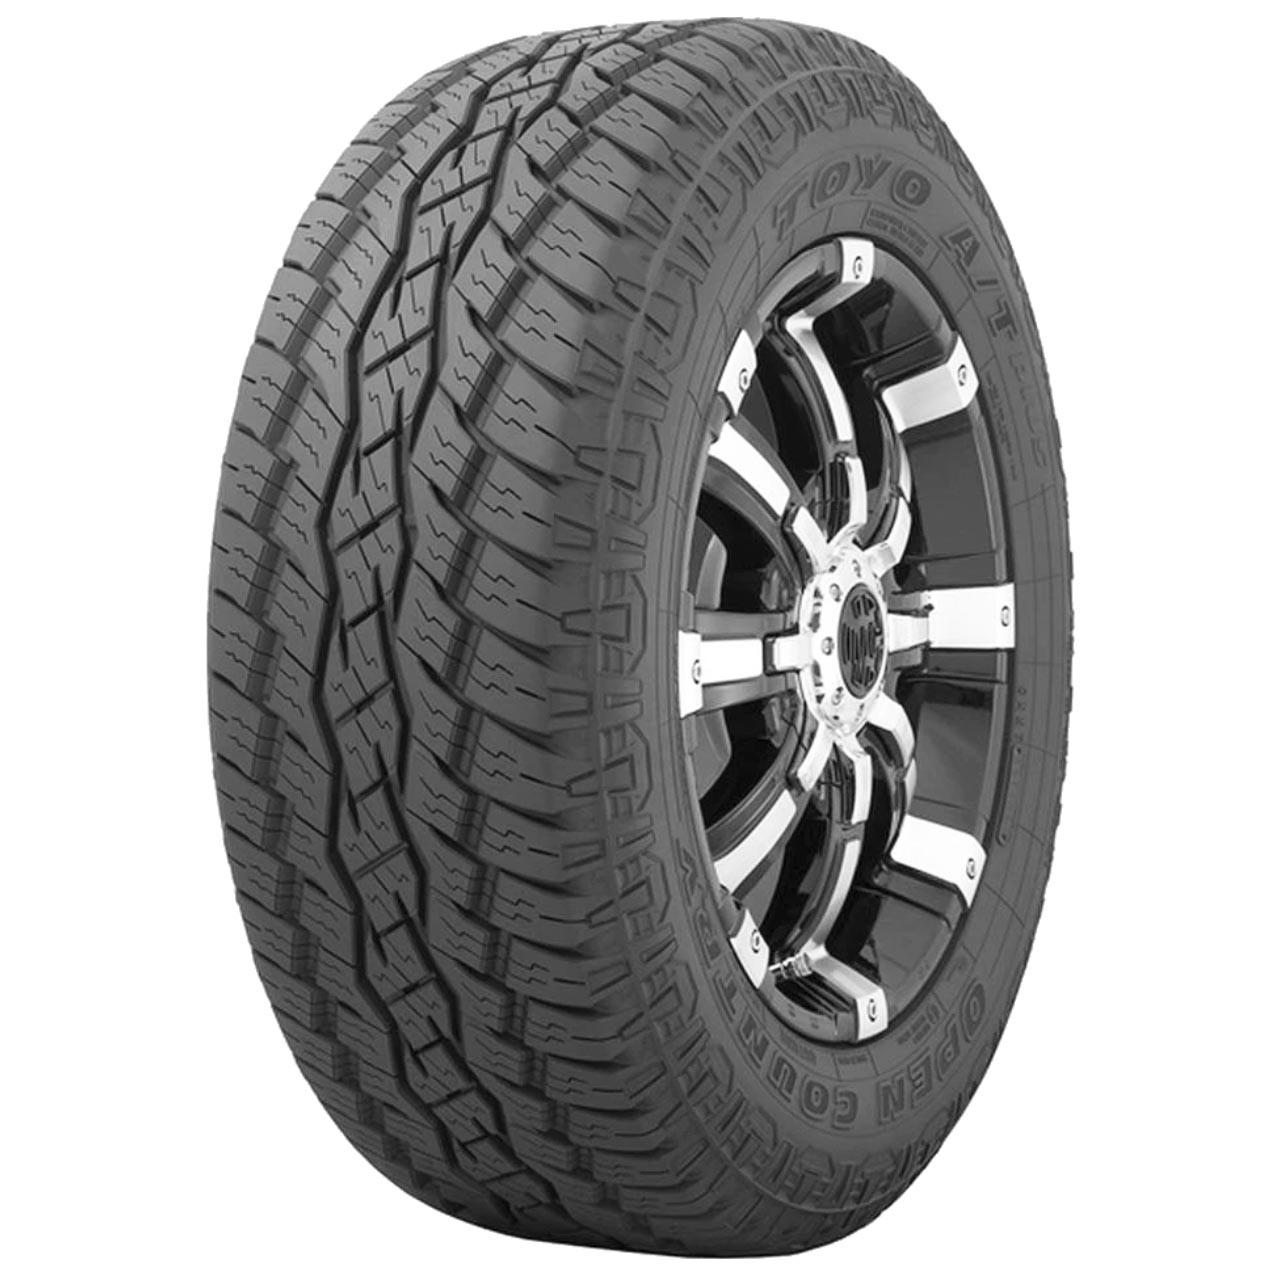 Toyo Open Country AT Plus 235/70R16 106T